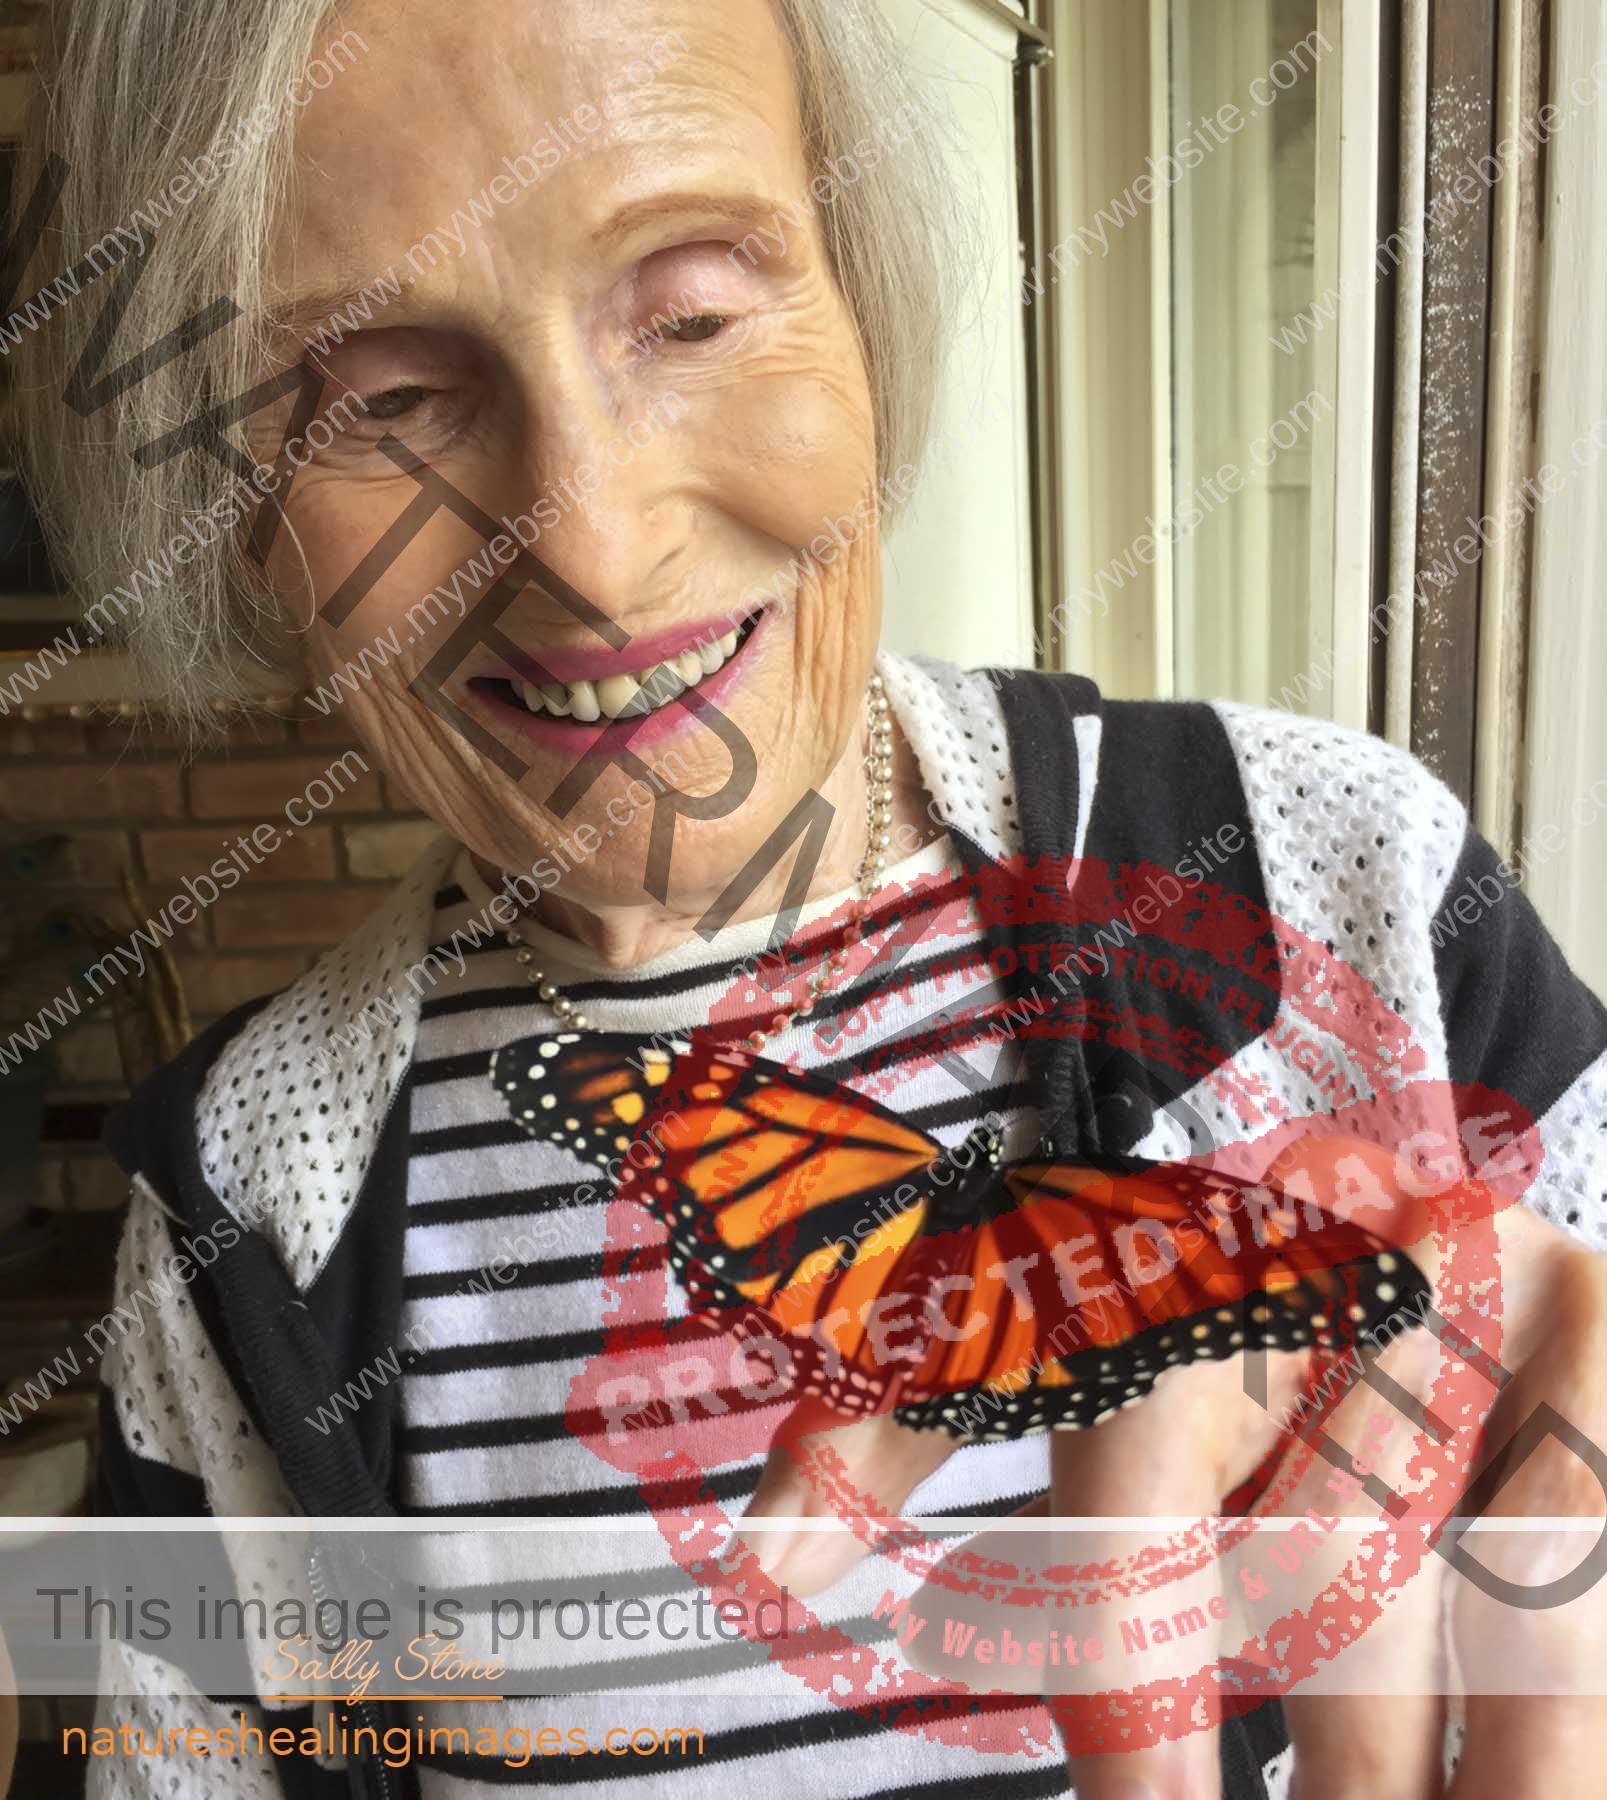 Monarch Butterfly Lifecycle, Monarch Butterfly on Mom's Finger